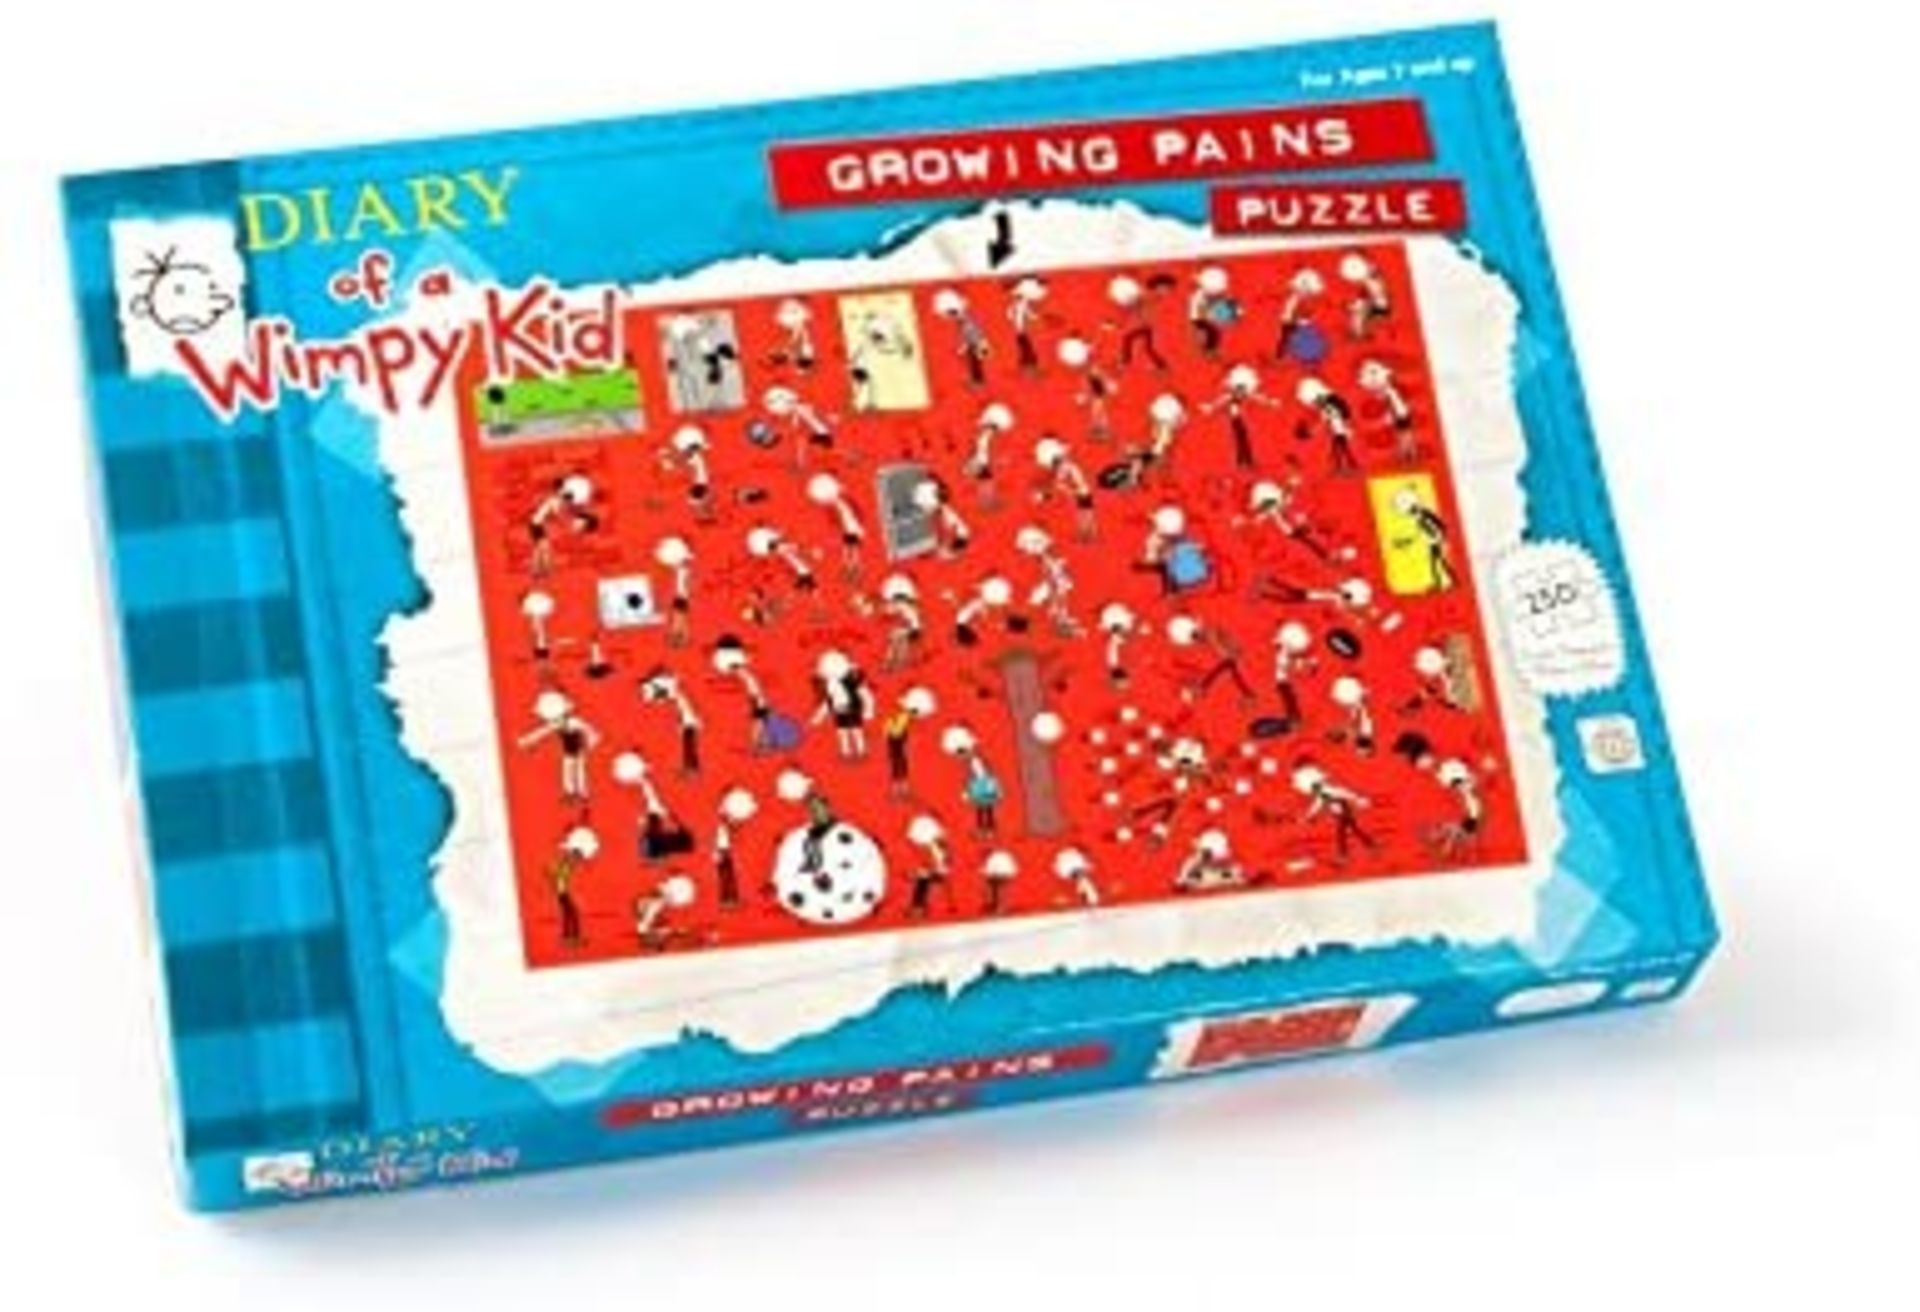 1 x Paul Lamond Diary of a Wimpy Kid Growing Pains Puzzle (250-Piece) |5012822052759